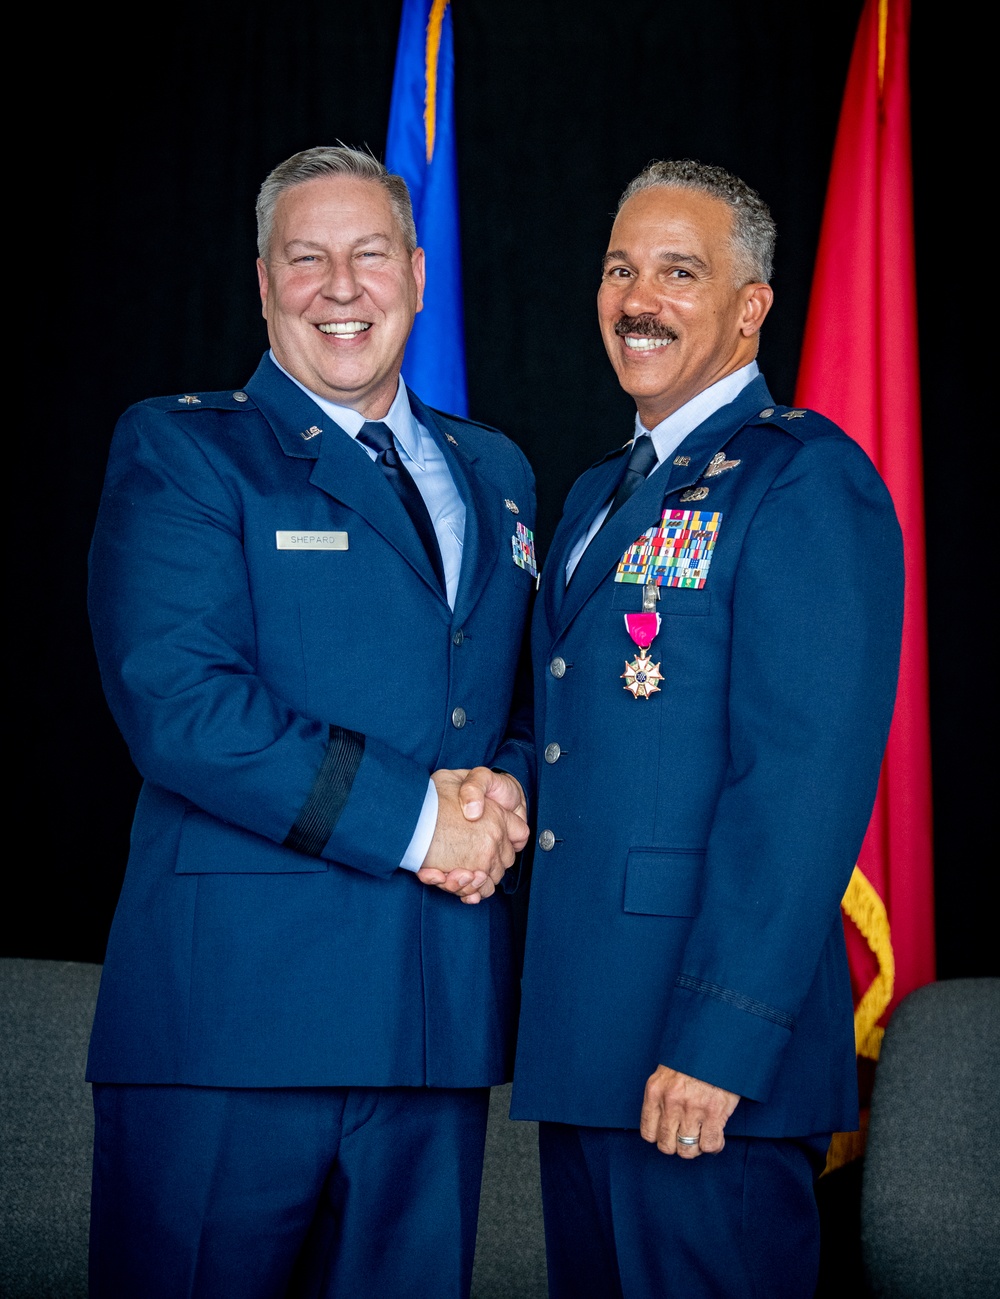 Cochran assumes command of West Virginia Air National Guard